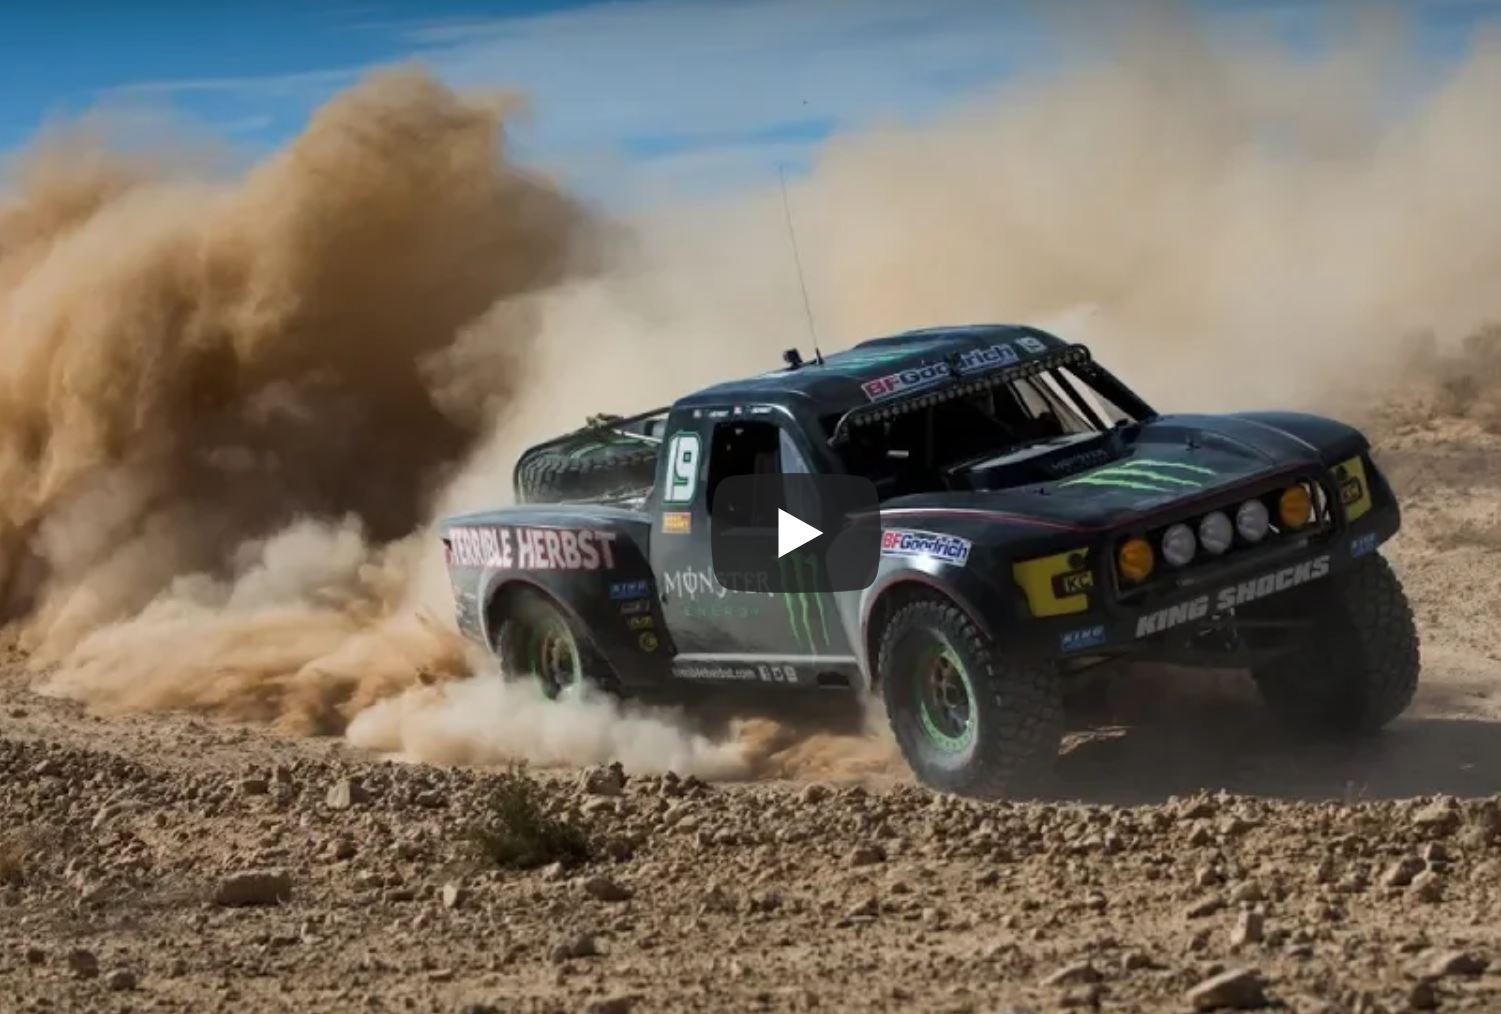 We Just Want To Go Desert Racing! Is That So Wrong?